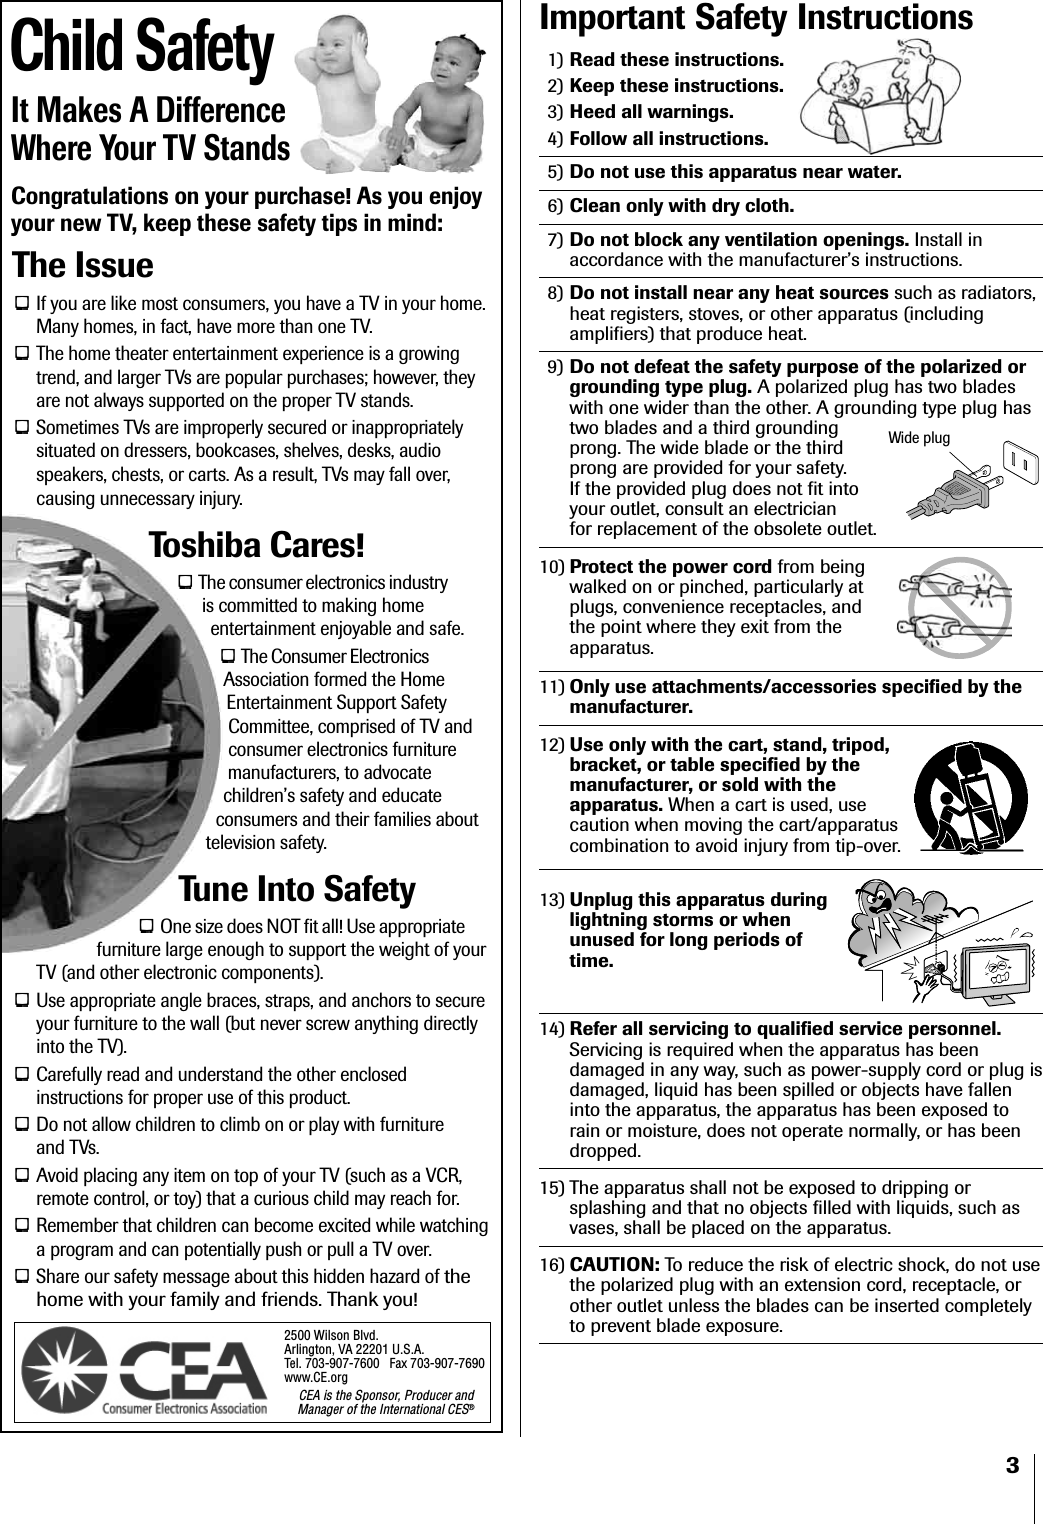 3Important Safety Instructions1) Read these instructions.2) Keep these instructions.3) Heed all warnings.4) Follow all instructions.5) Do not use this apparatus near water.6) Clean only with dry cloth.7) Do not block any ventilation openings. Install inaccordance with the manufacturer’s instructions.8) Do not install near any heat sources such as radiators,heat registers, stoves, or other apparatus (includingamplifiers) that produce heat.9) Do not defeat the safety purpose of the polarized orgrounding type plug. A polarized plug has two bladeswith one wider than the other. A grounding type plug hastwo blades and a third groundingprong. The wide blade or the thirdprong are provided for your safety.If the provided plug does not fit intoyour outlet, consult an electricianfor replacement of the obsolete outlet.10) Protect the power cord from beingwalked on or pinched, particularly atplugs, convenience receptacles, andthe point where they exit from theapparatus.11) Only use attachments/accessories specified by themanufacturer.12) Use only with the cart, stand, tripod,bracket, or table specified by themanufacturer, or sold with theapparatus. When a cart is used, usecaution when moving the cart/apparatuscombination to avoid injury from tip-over.13) Unplug this apparatus duringlightning storms or whenunused for long periods oftime.14) Refer all servicing to qualified service personnel.Servicing is required when the apparatus has beendamaged in any way, such as power-supply cord or plug isdamaged, liquid has been spilled or objects have falleninto the apparatus, the apparatus has been exposed torain or moisture, does not operate normally, or has beendropped.15) The apparatus shall not be exposed to dripping orsplashing and that no objects filled with liquids, such asvases, shall be placed on the apparatus.16) CAUTION: To reduce the risk of electric shock, do not usethe polarized plug with an extension cord, receptacle, orother outlet unless the blades can be inserted completelyto prevent blade exposure.Child SafetyIt Makes A DifferenceWhere Your TV StandsCongratulations on your purchase! As you enjoyyour new TV, keep these safety tips in mind:The IssueIf you are like most consumers, you have a TV in your home.Many homes, in fact, have more than one TV.The home theater entertainment experience is a growingtrend, and larger TVs are popular purchases; however, theyare not always supported on the proper TV stands.Sometimes TVs are improperly secured or inappropriatelysituated on dressers, bookcases, shelves, desks, audiospeakers, chests, or carts. As a result, TVs may fall over,causing unnecessary injury.Toshiba Cares!The consumer electronics industryis committed to making homeentertainment enjoyable and safe.The Consumer ElectronicsAssociation formed the HomeEntertainment Support SafetyCommittee, comprised of TV andconsumer electronics furnituremanufacturers, to advocatechildren’s safety and educateconsumers and their families abouttelevision safety.Tune Into SafetyOne size does NOT fit all! Use appropriatefurniture large enough to support the weight of yourTV (and other electronic components).Use appropriate angle braces, straps, and anchors to secureyour furniture to the wall (but never screw anything directlyinto the TV).Carefully read and understand the other enclosedinstructions for proper use of this product.Do not allow children to climb on or play with furnitureand TVs.Avoid placing any item on top of your TV (such as a VCR,remote control, or toy) that a curious child may reach for.Remember that children can become excited while watchinga program and can potentially push or pull a TV over.Share our safety message about this hidden hazard of thehome with your family and friends. Thank you!2500 Wilson Blvd.Arlington, VA 22201 U.S.A.Tel. 703-907-7600  Fax 703-907-7690www.CE.orgCEA is the Sponsor, Producer andManager of the International CES®Wide plug